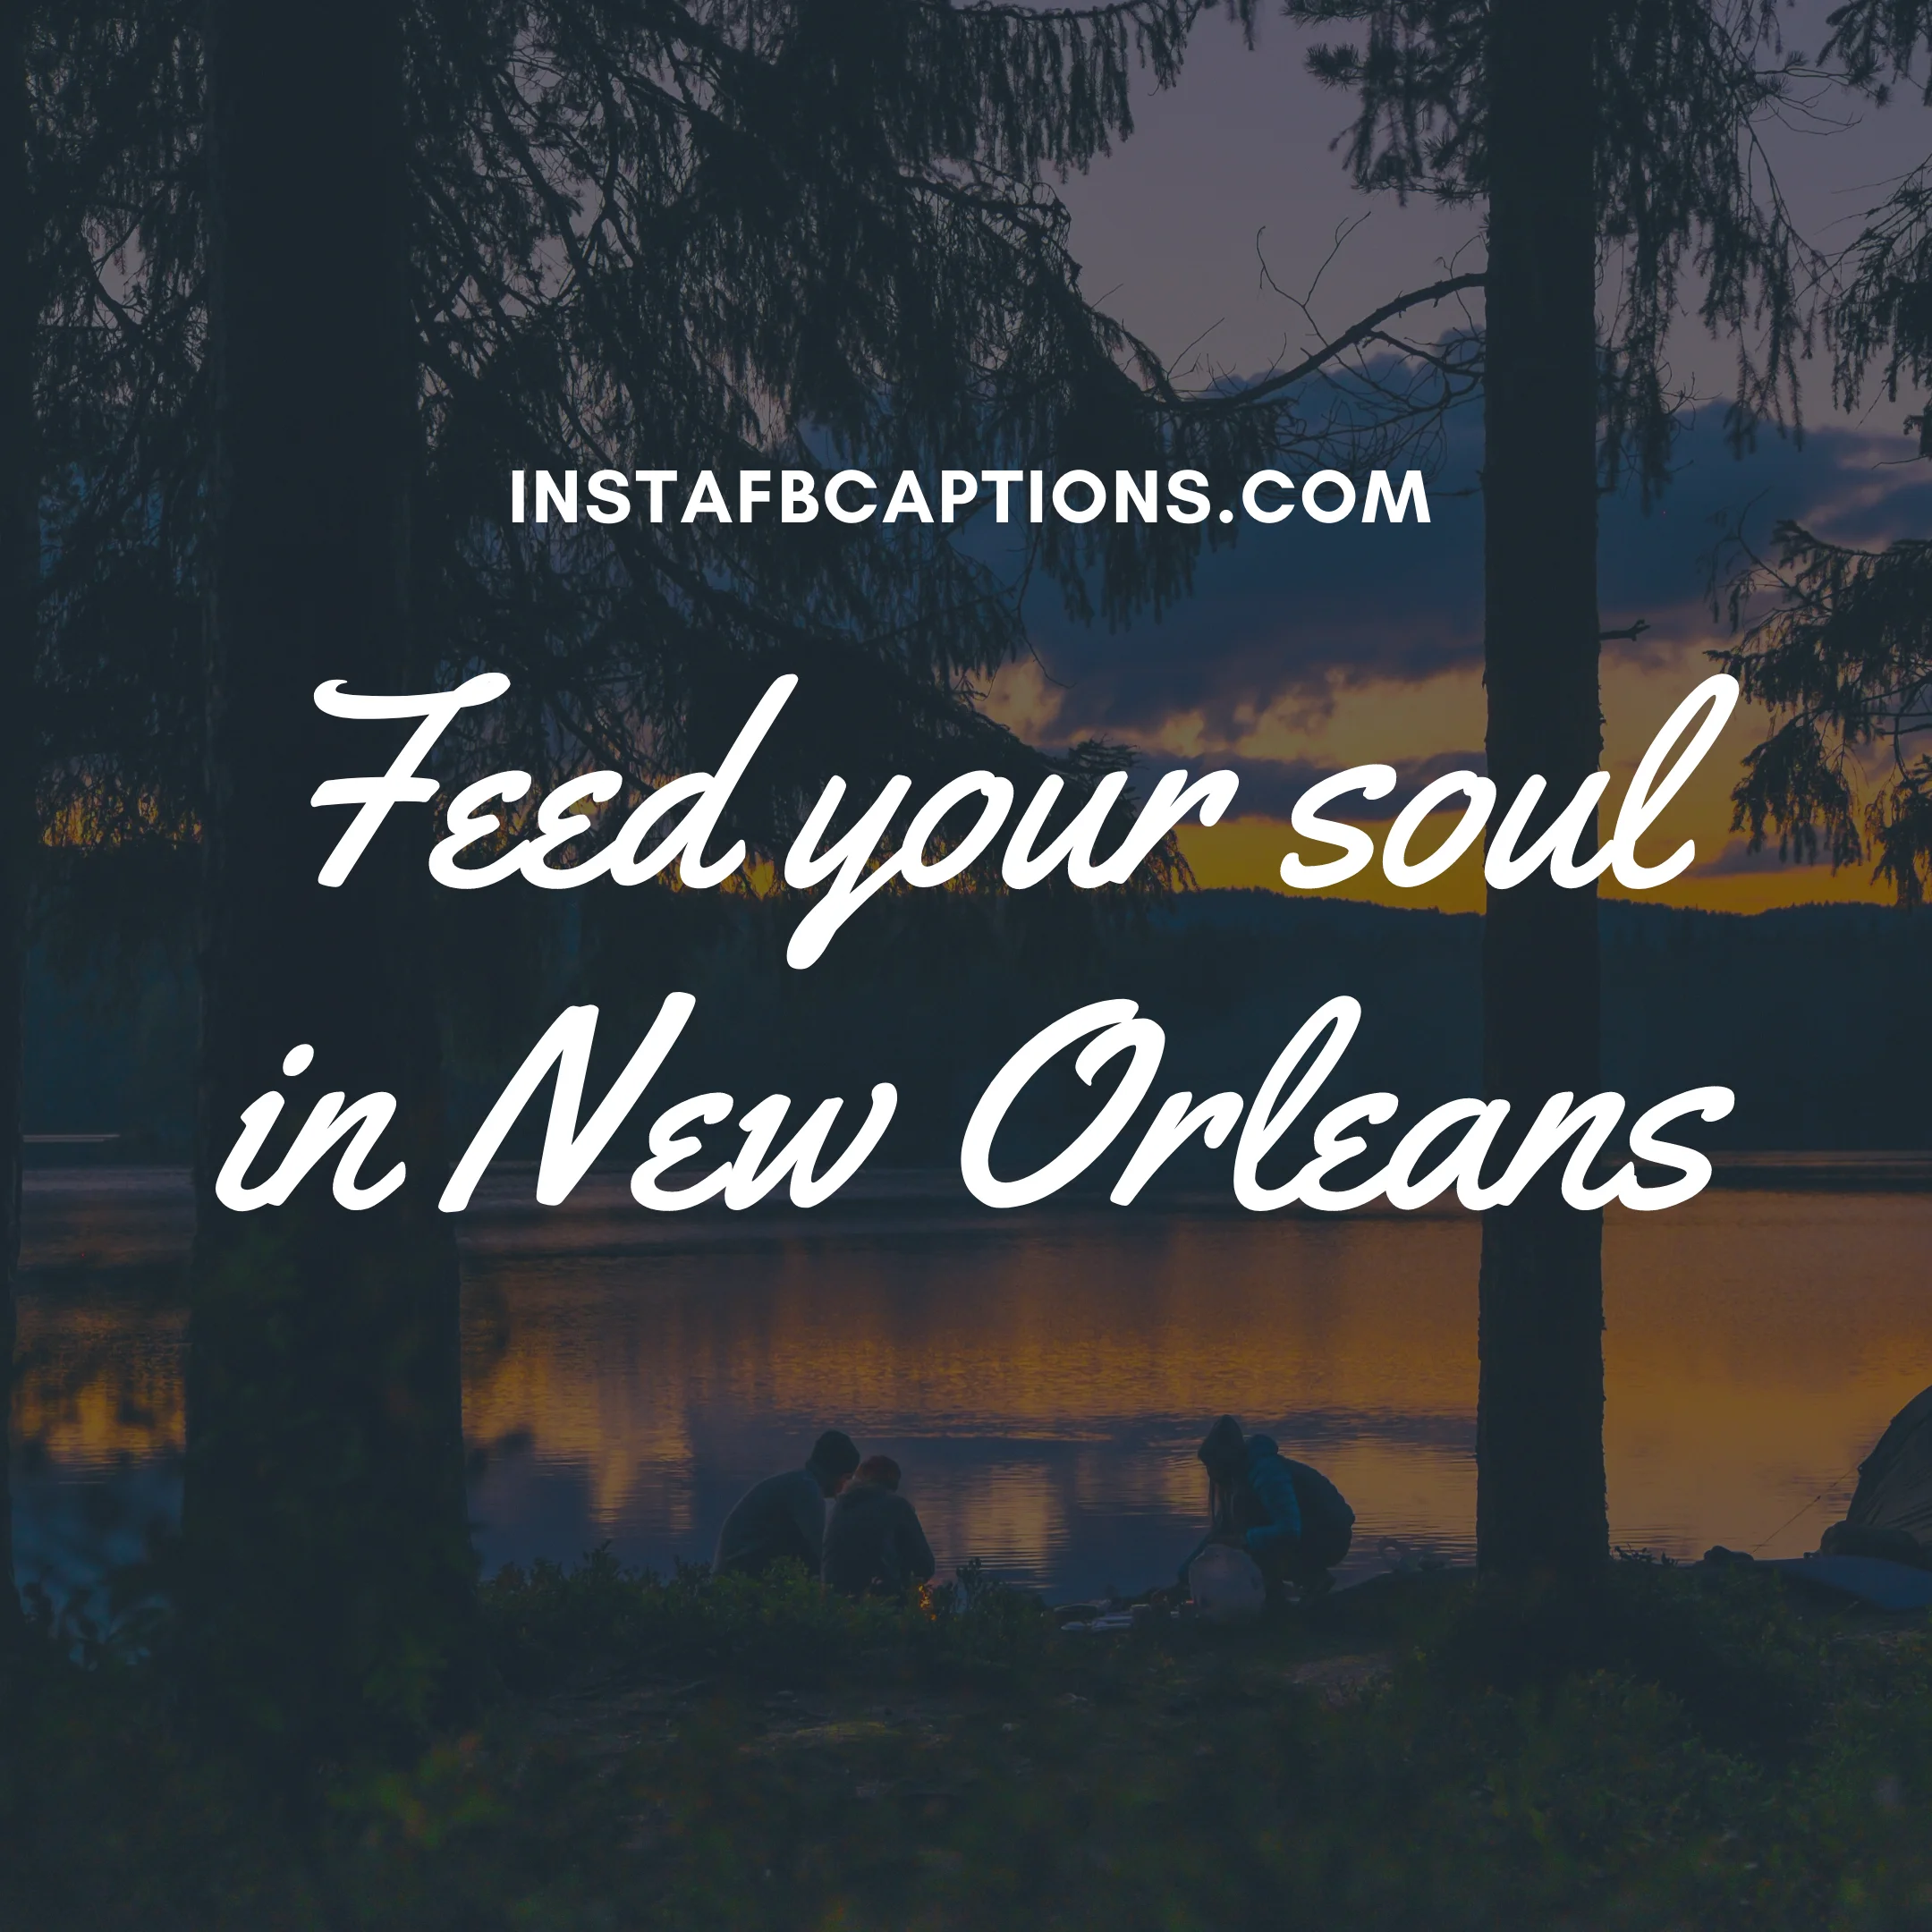 New Orleans Puns Short And Fu  - New Orleans Puns Short and Fun - Funny New Orleans Captions Quotes for Instagram Posts in 2023